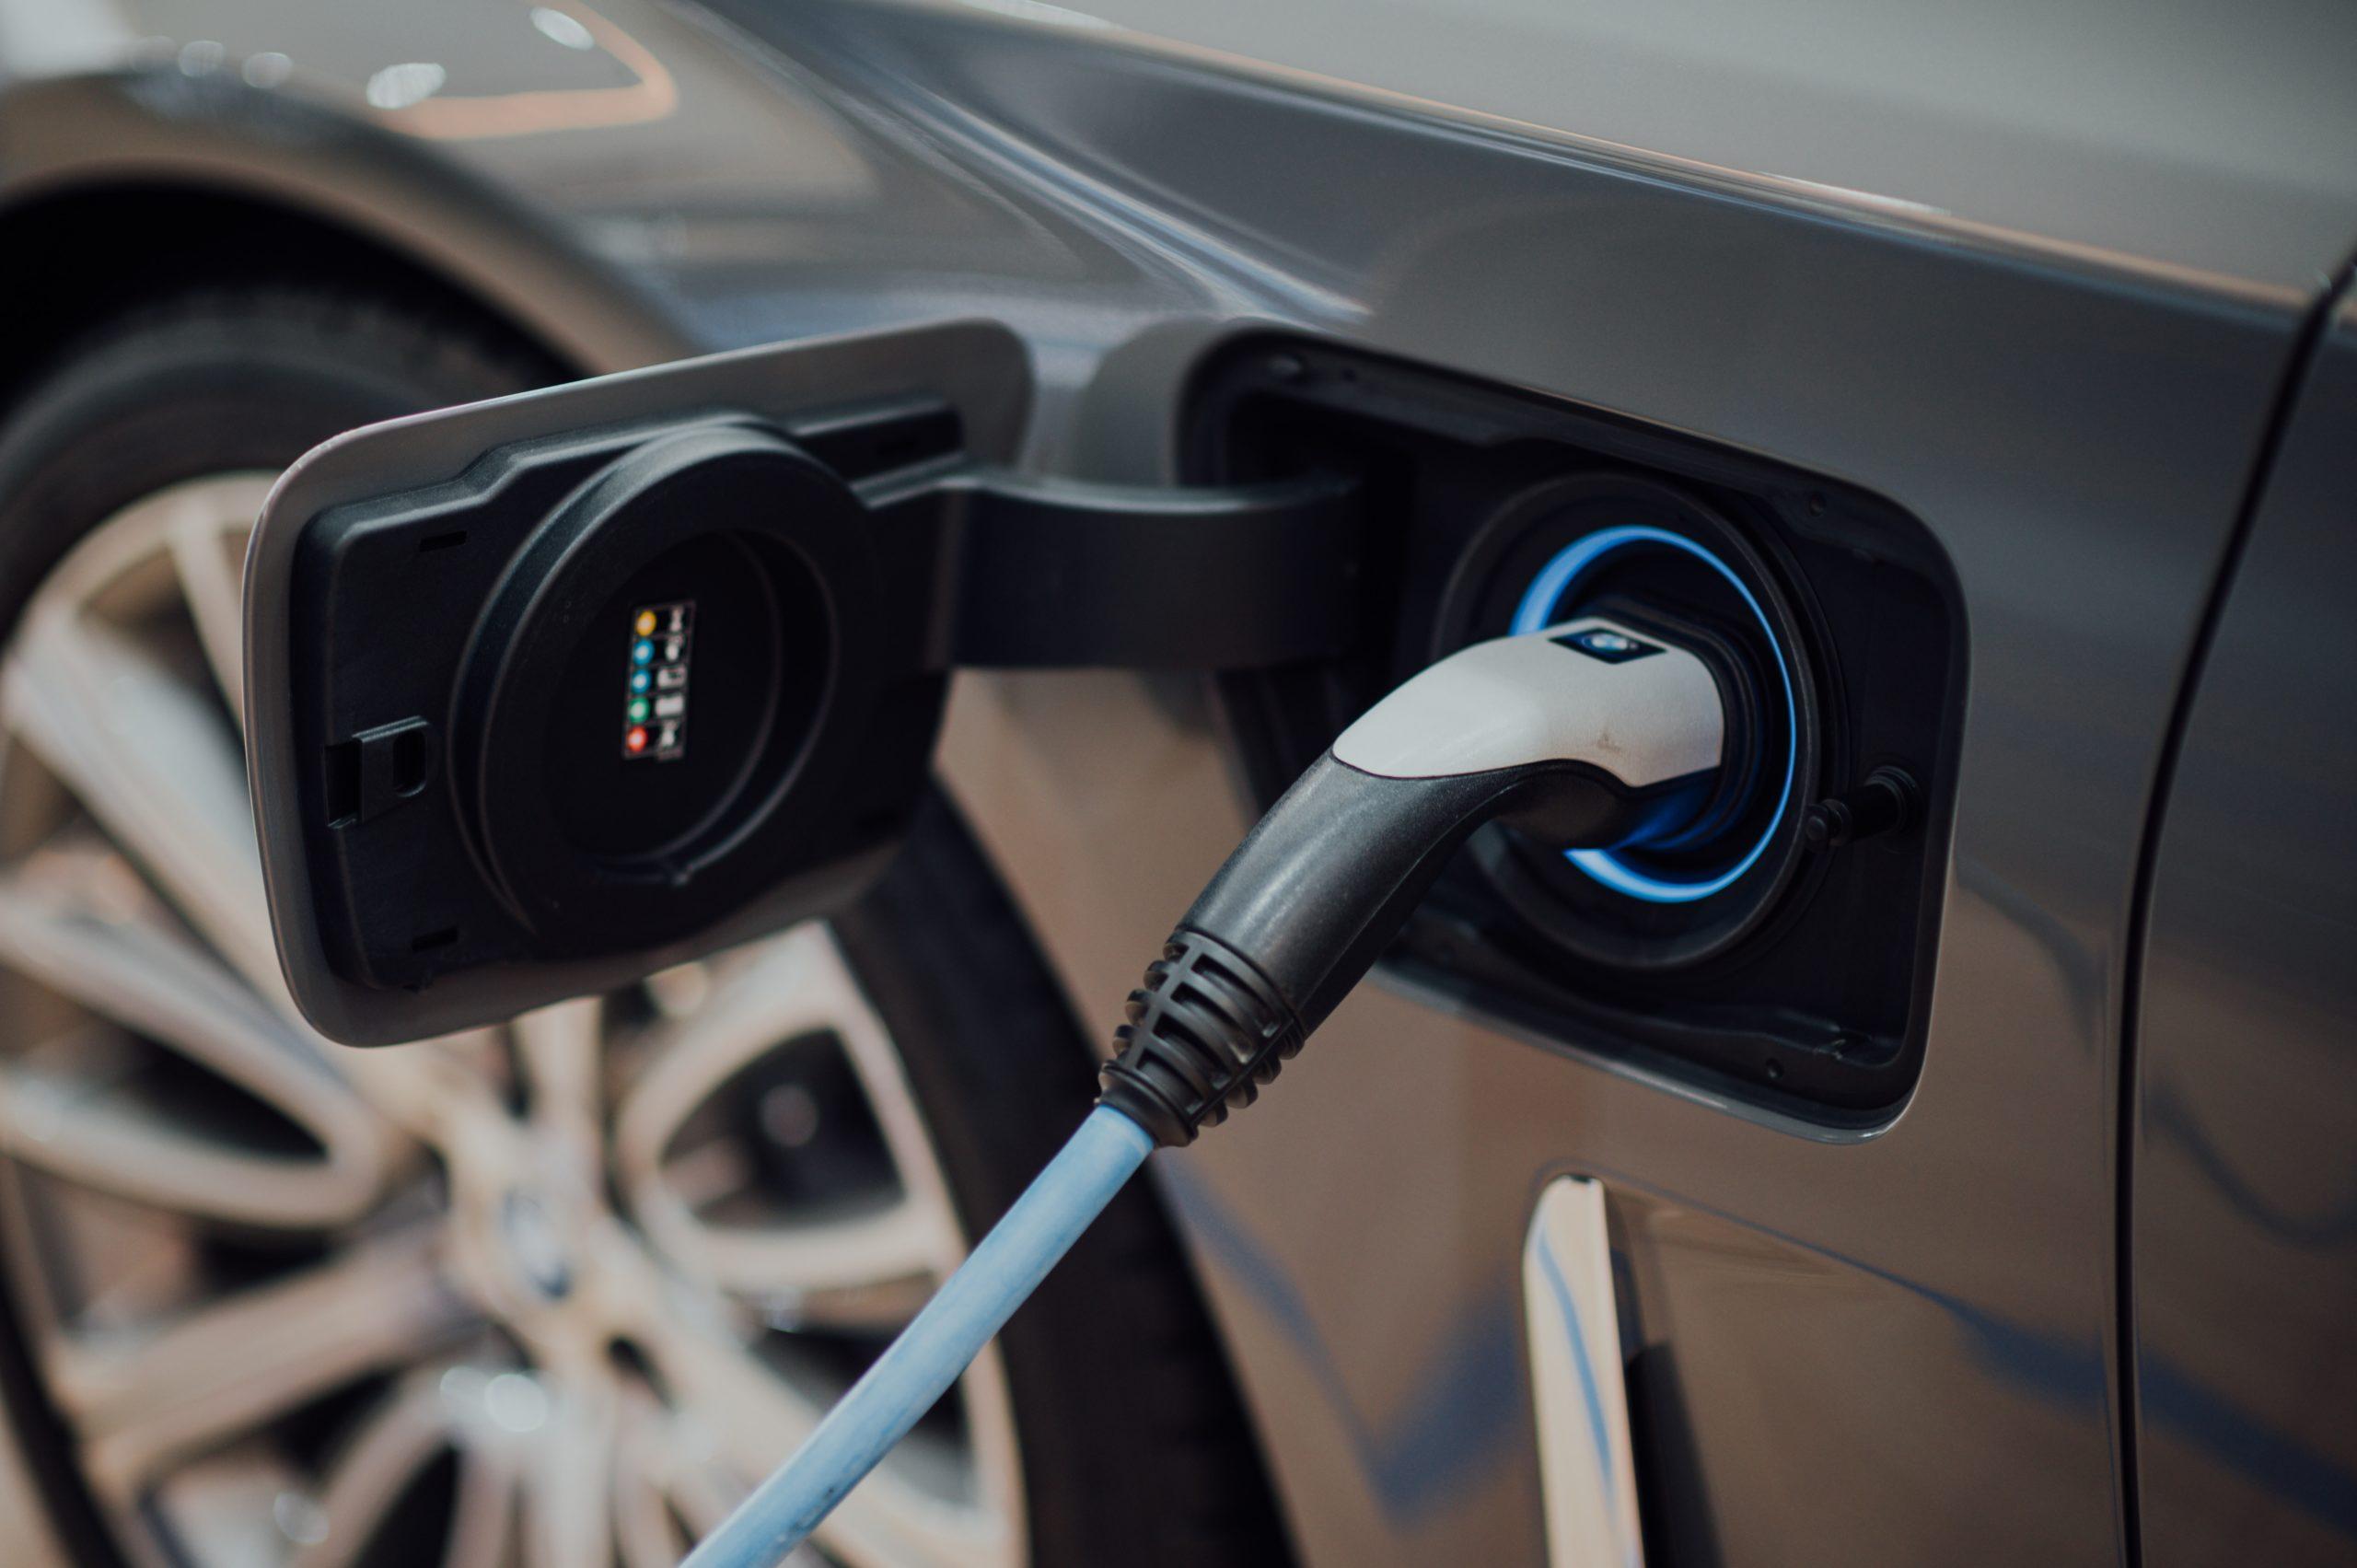 Product Commercial Electric Vehicle (EV) Charging Installers in Kent, Sussex, Surrey & London Areas | For Work, Business, Public Car Parks & New Build Developments image